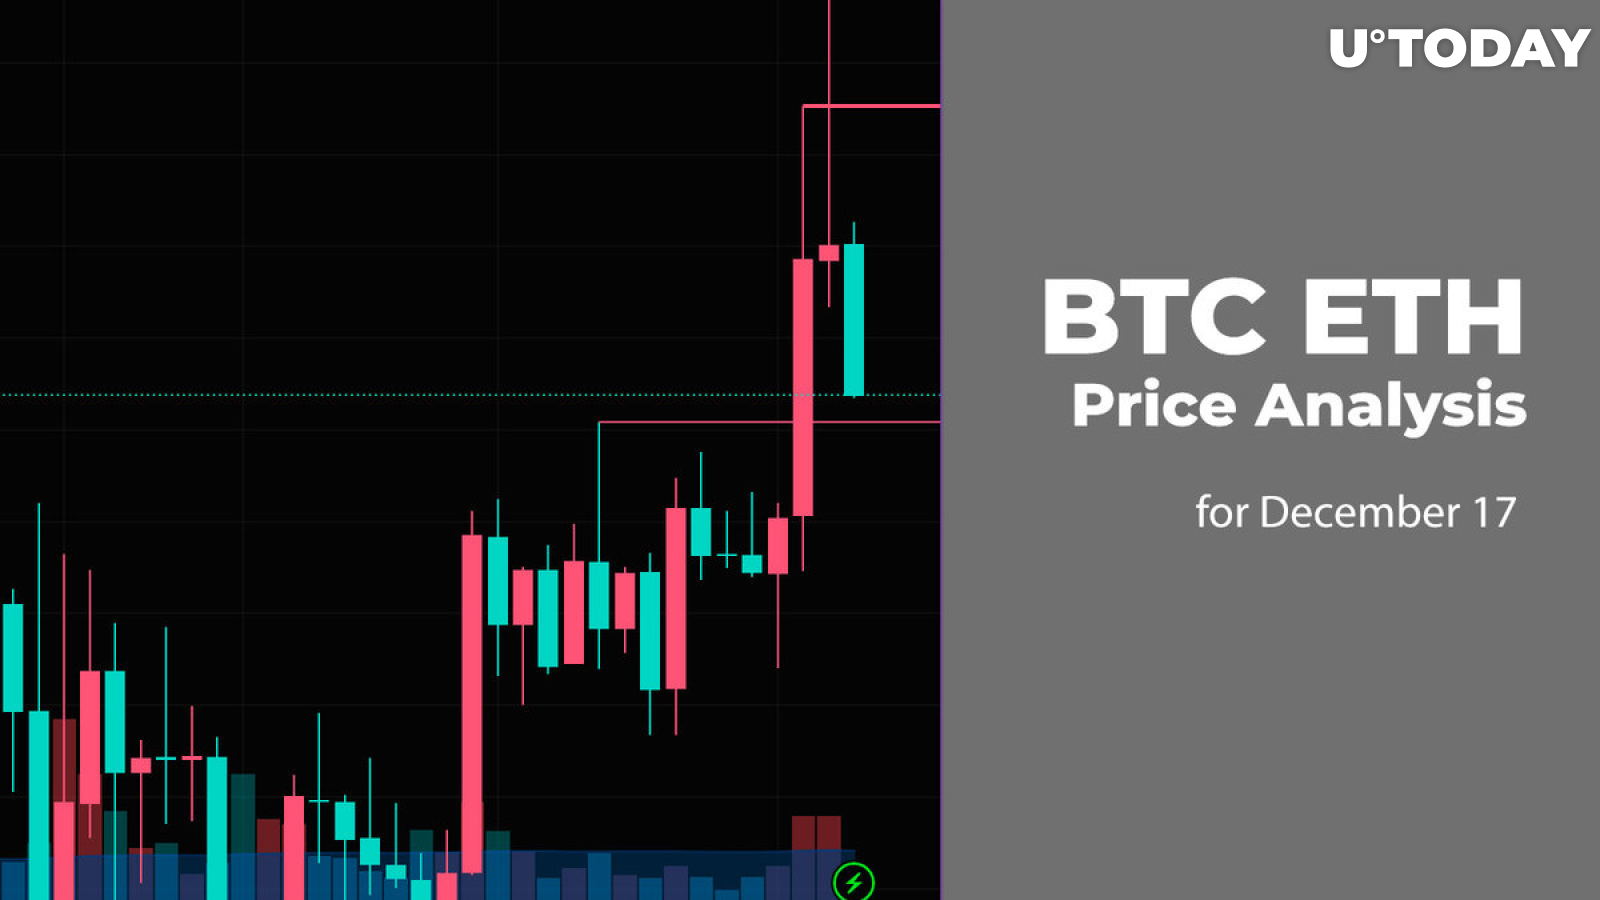 BTC and ETH Price Analysis for December 17